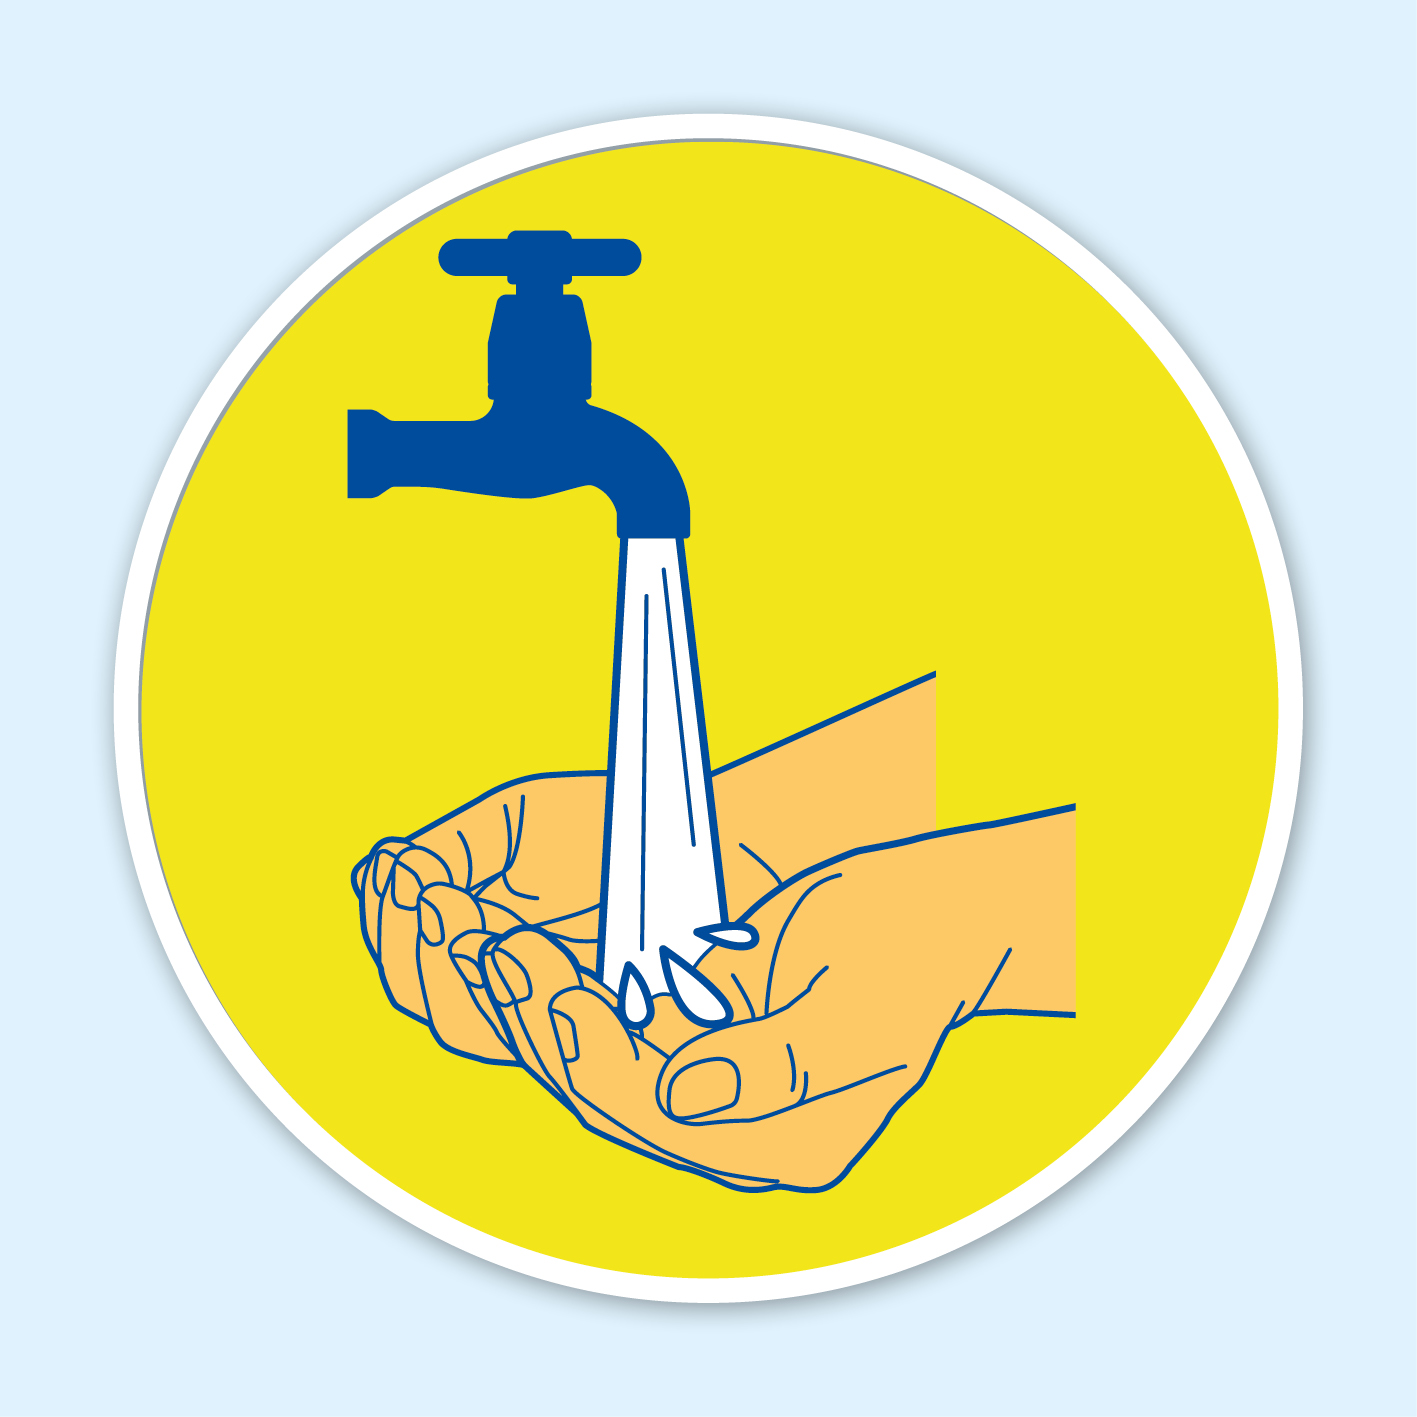 Illustration showing hands being rinsed